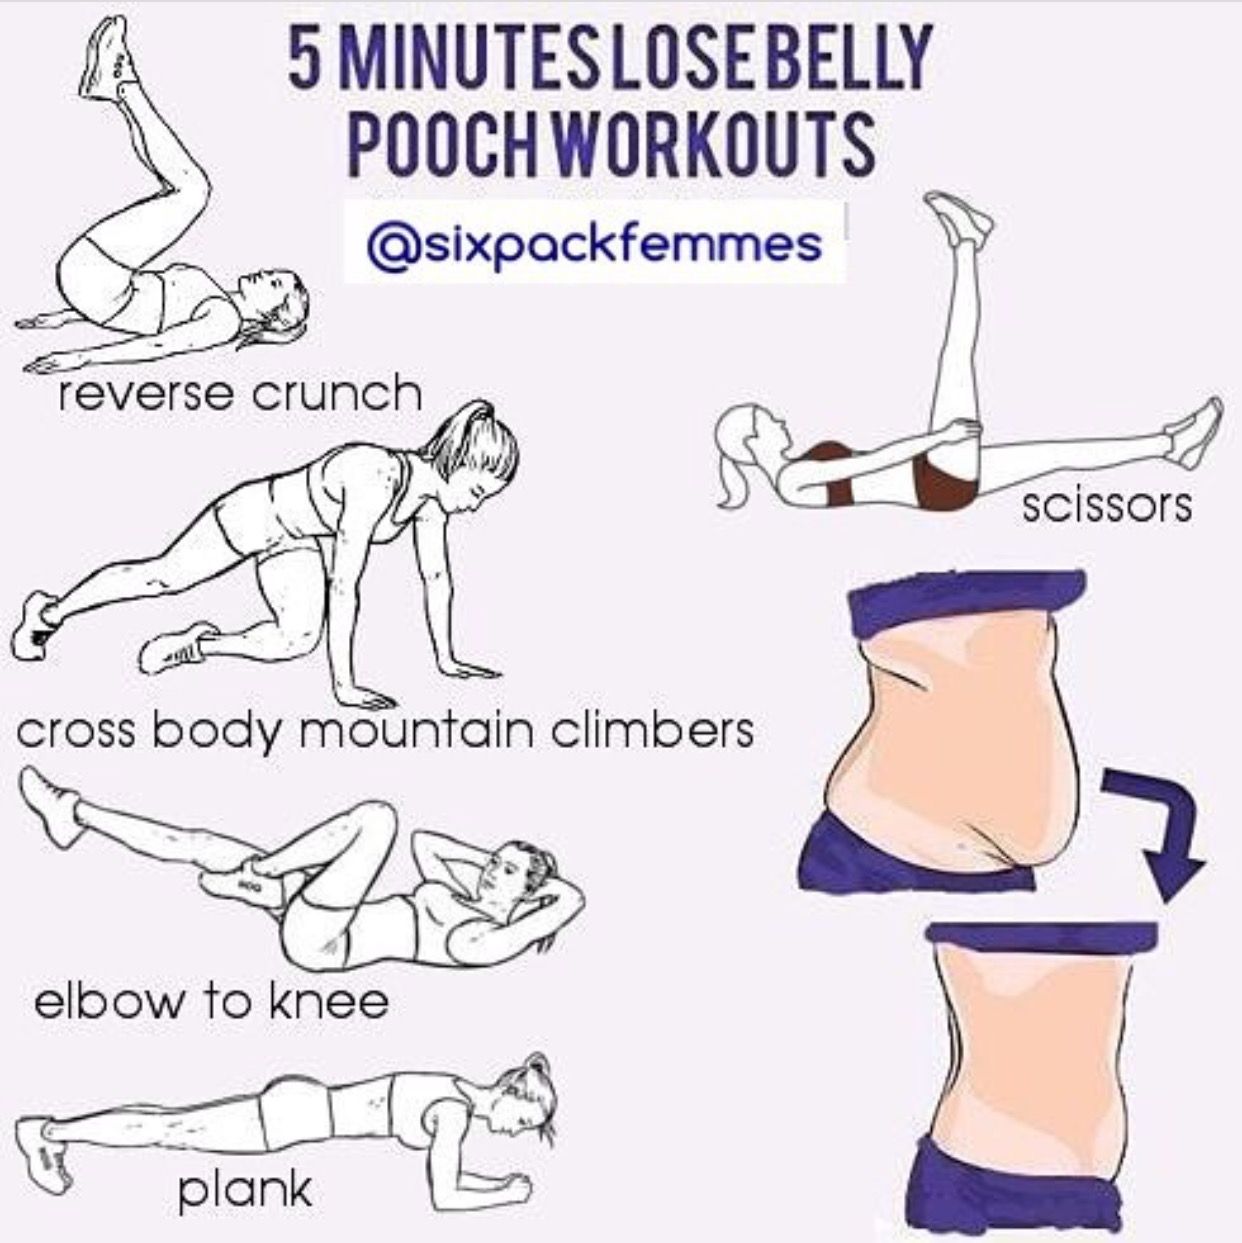 Belly pouch workout at home